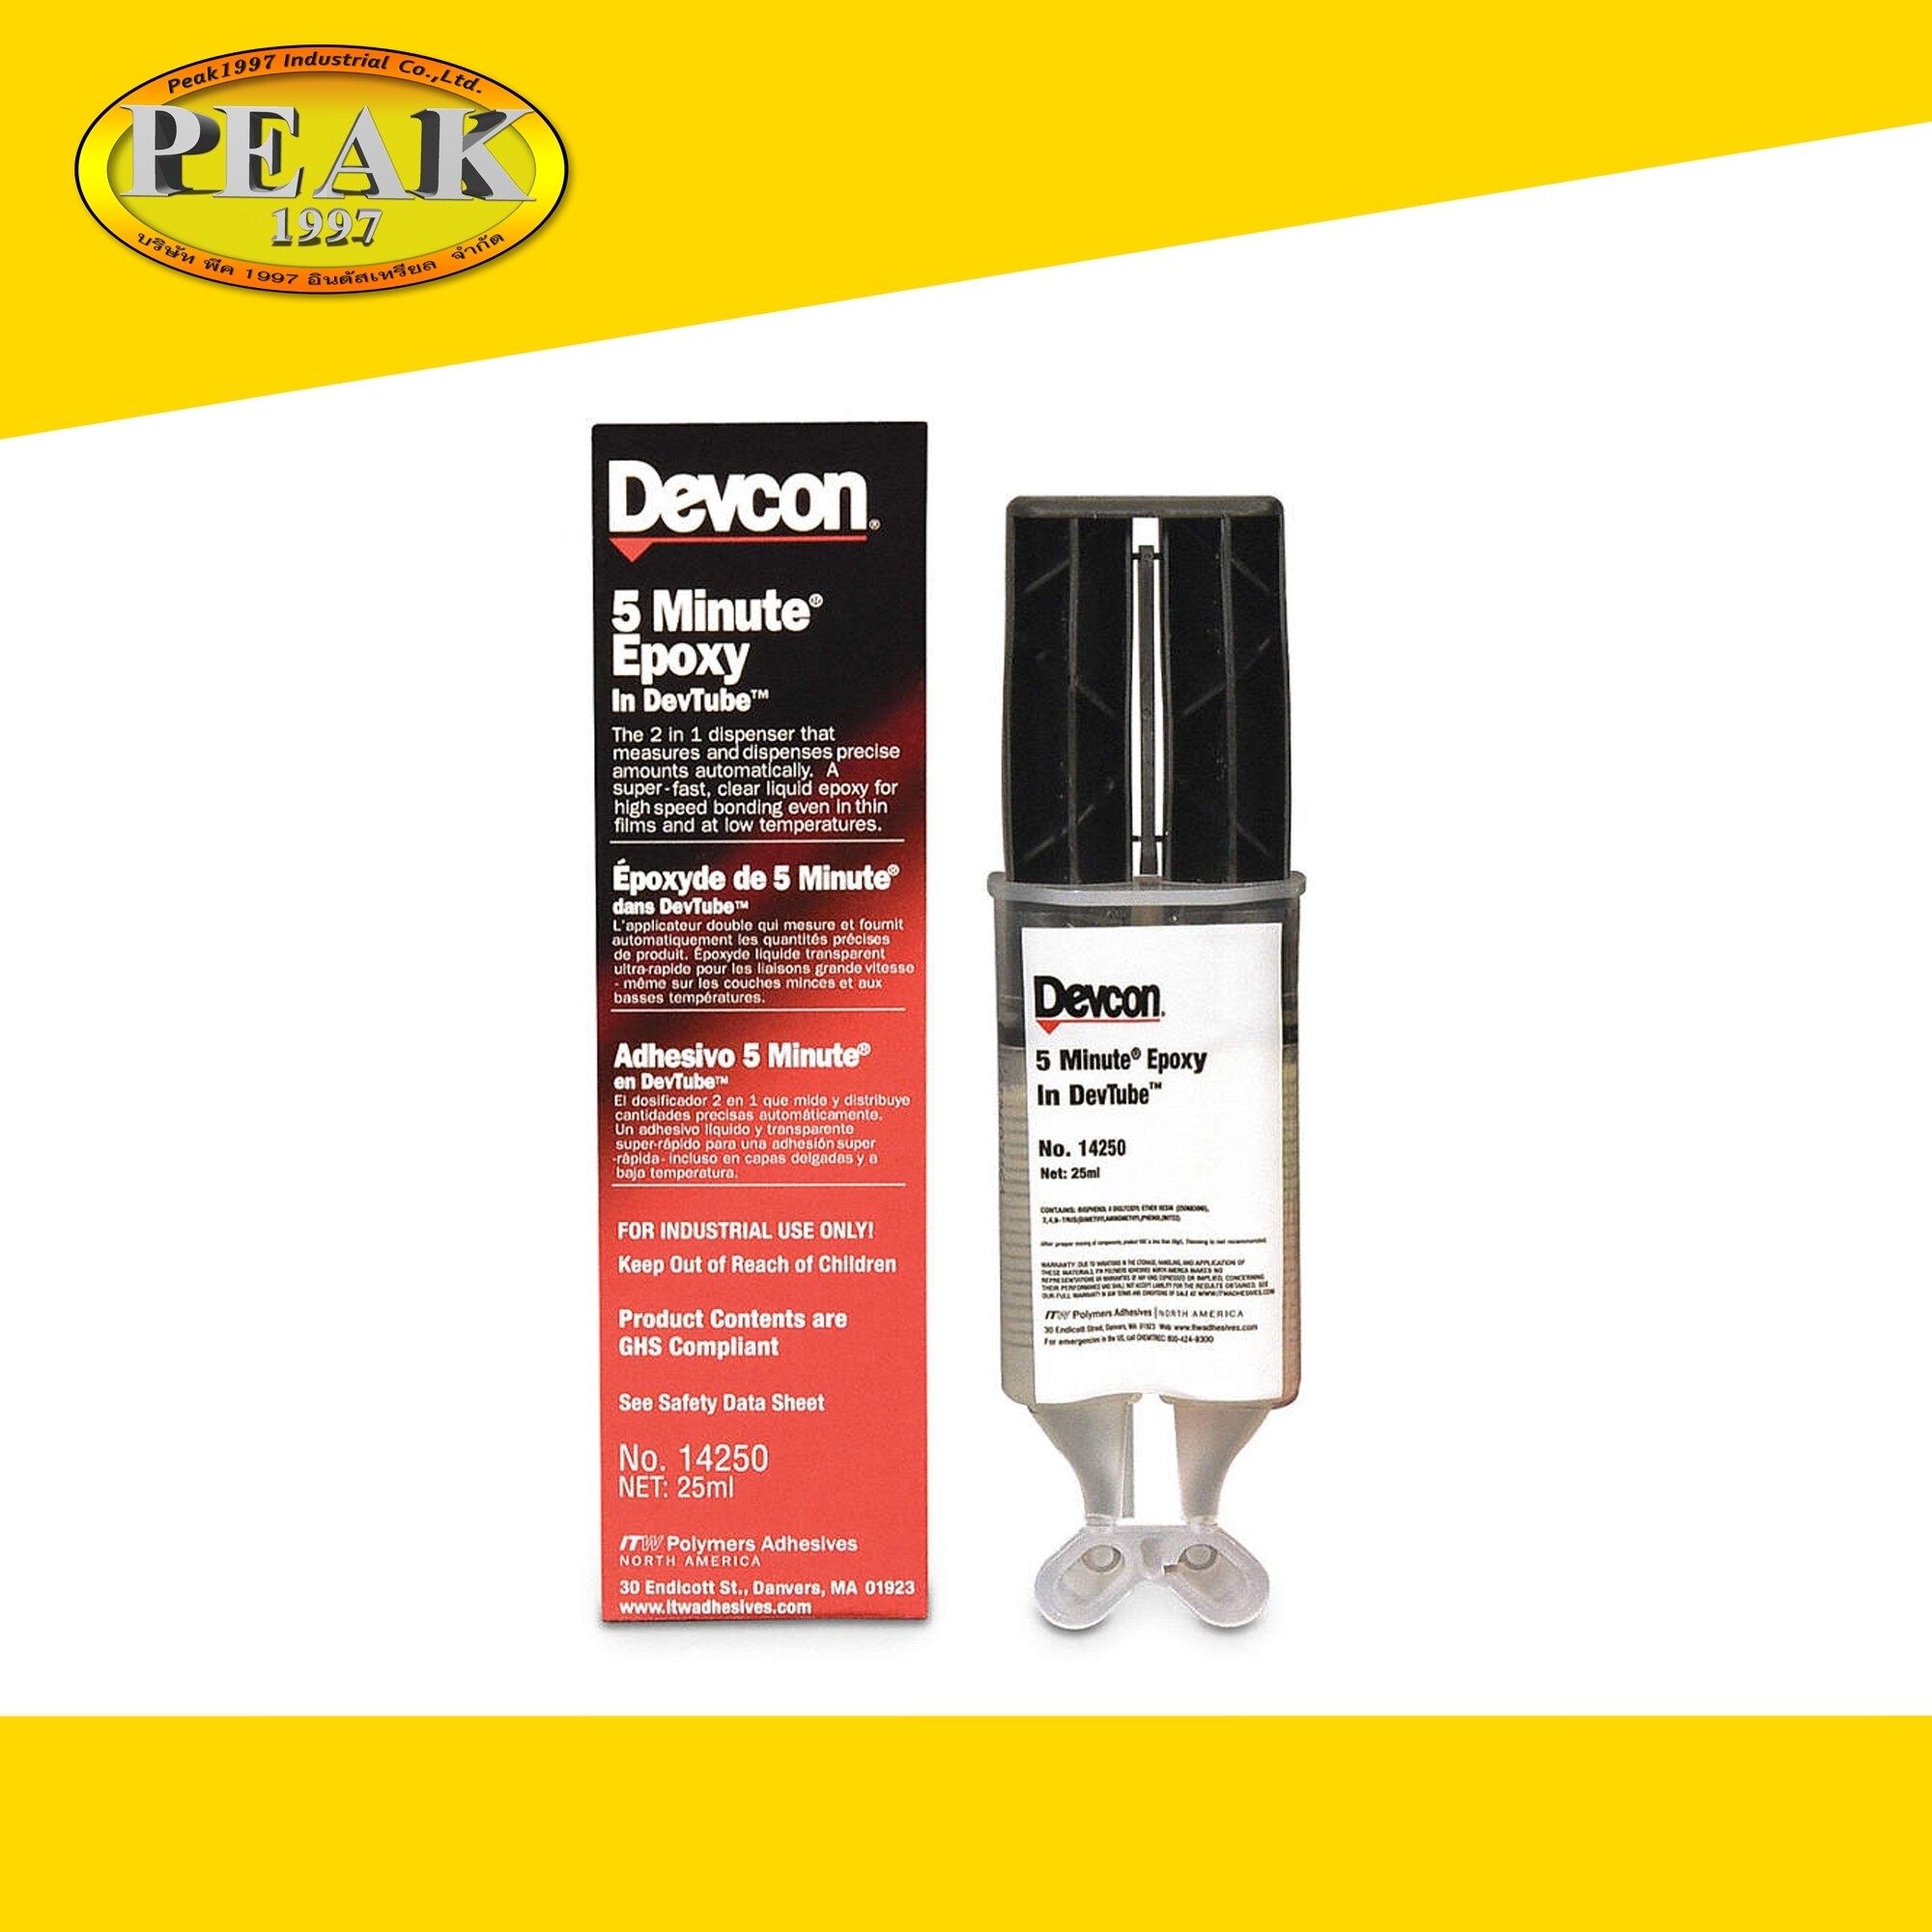 devcon ceramic repair putty hardener - ITW Polymers and Fluids